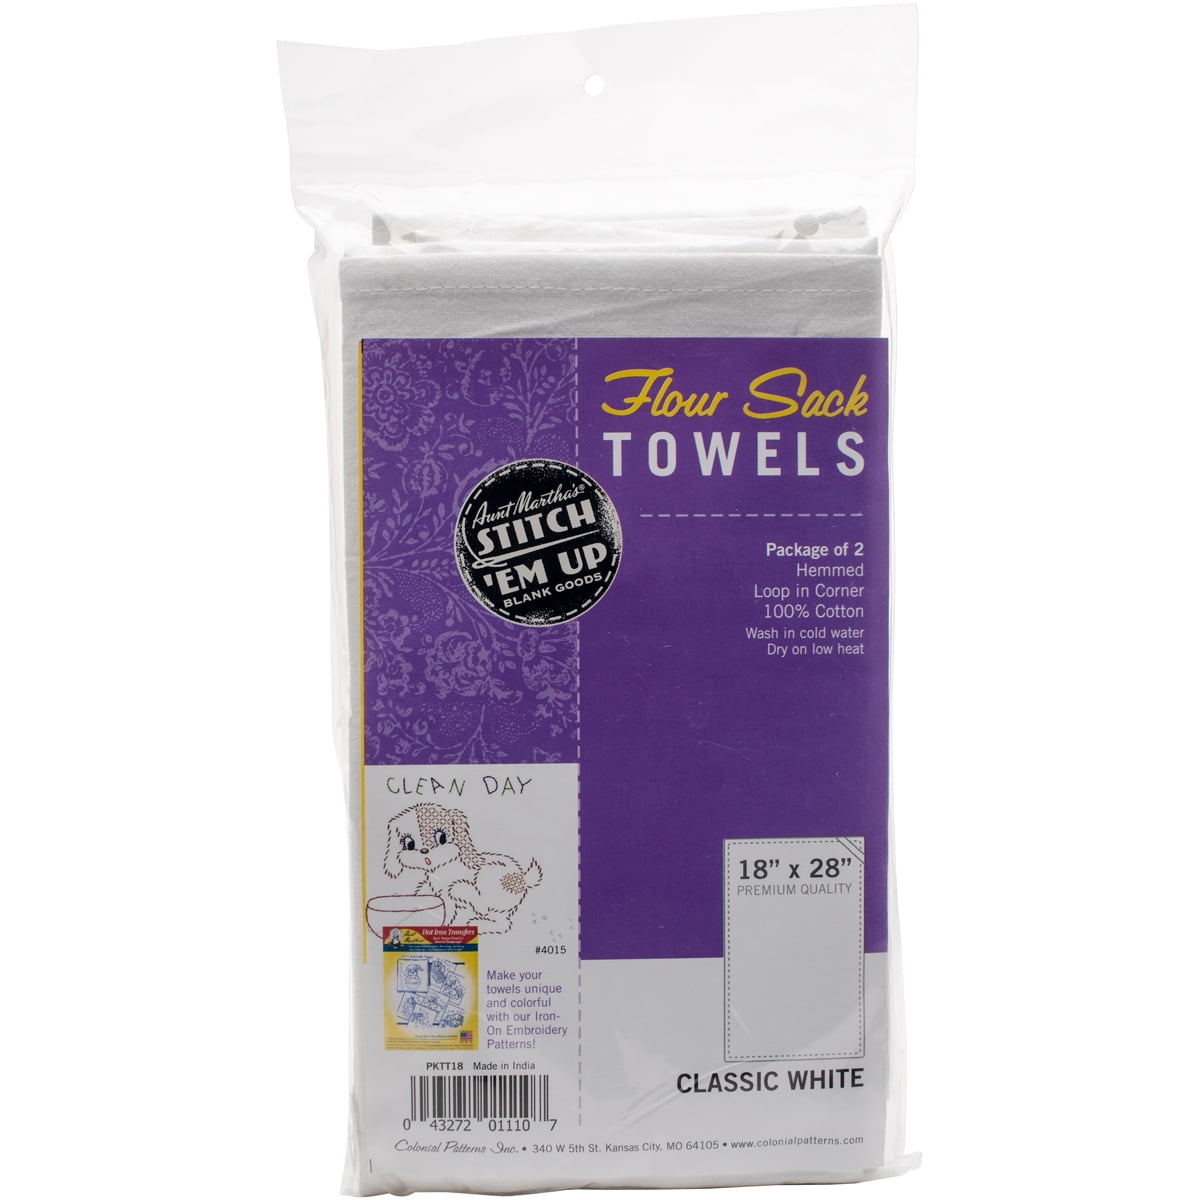 White Flour Sack Towels -Pack of 5